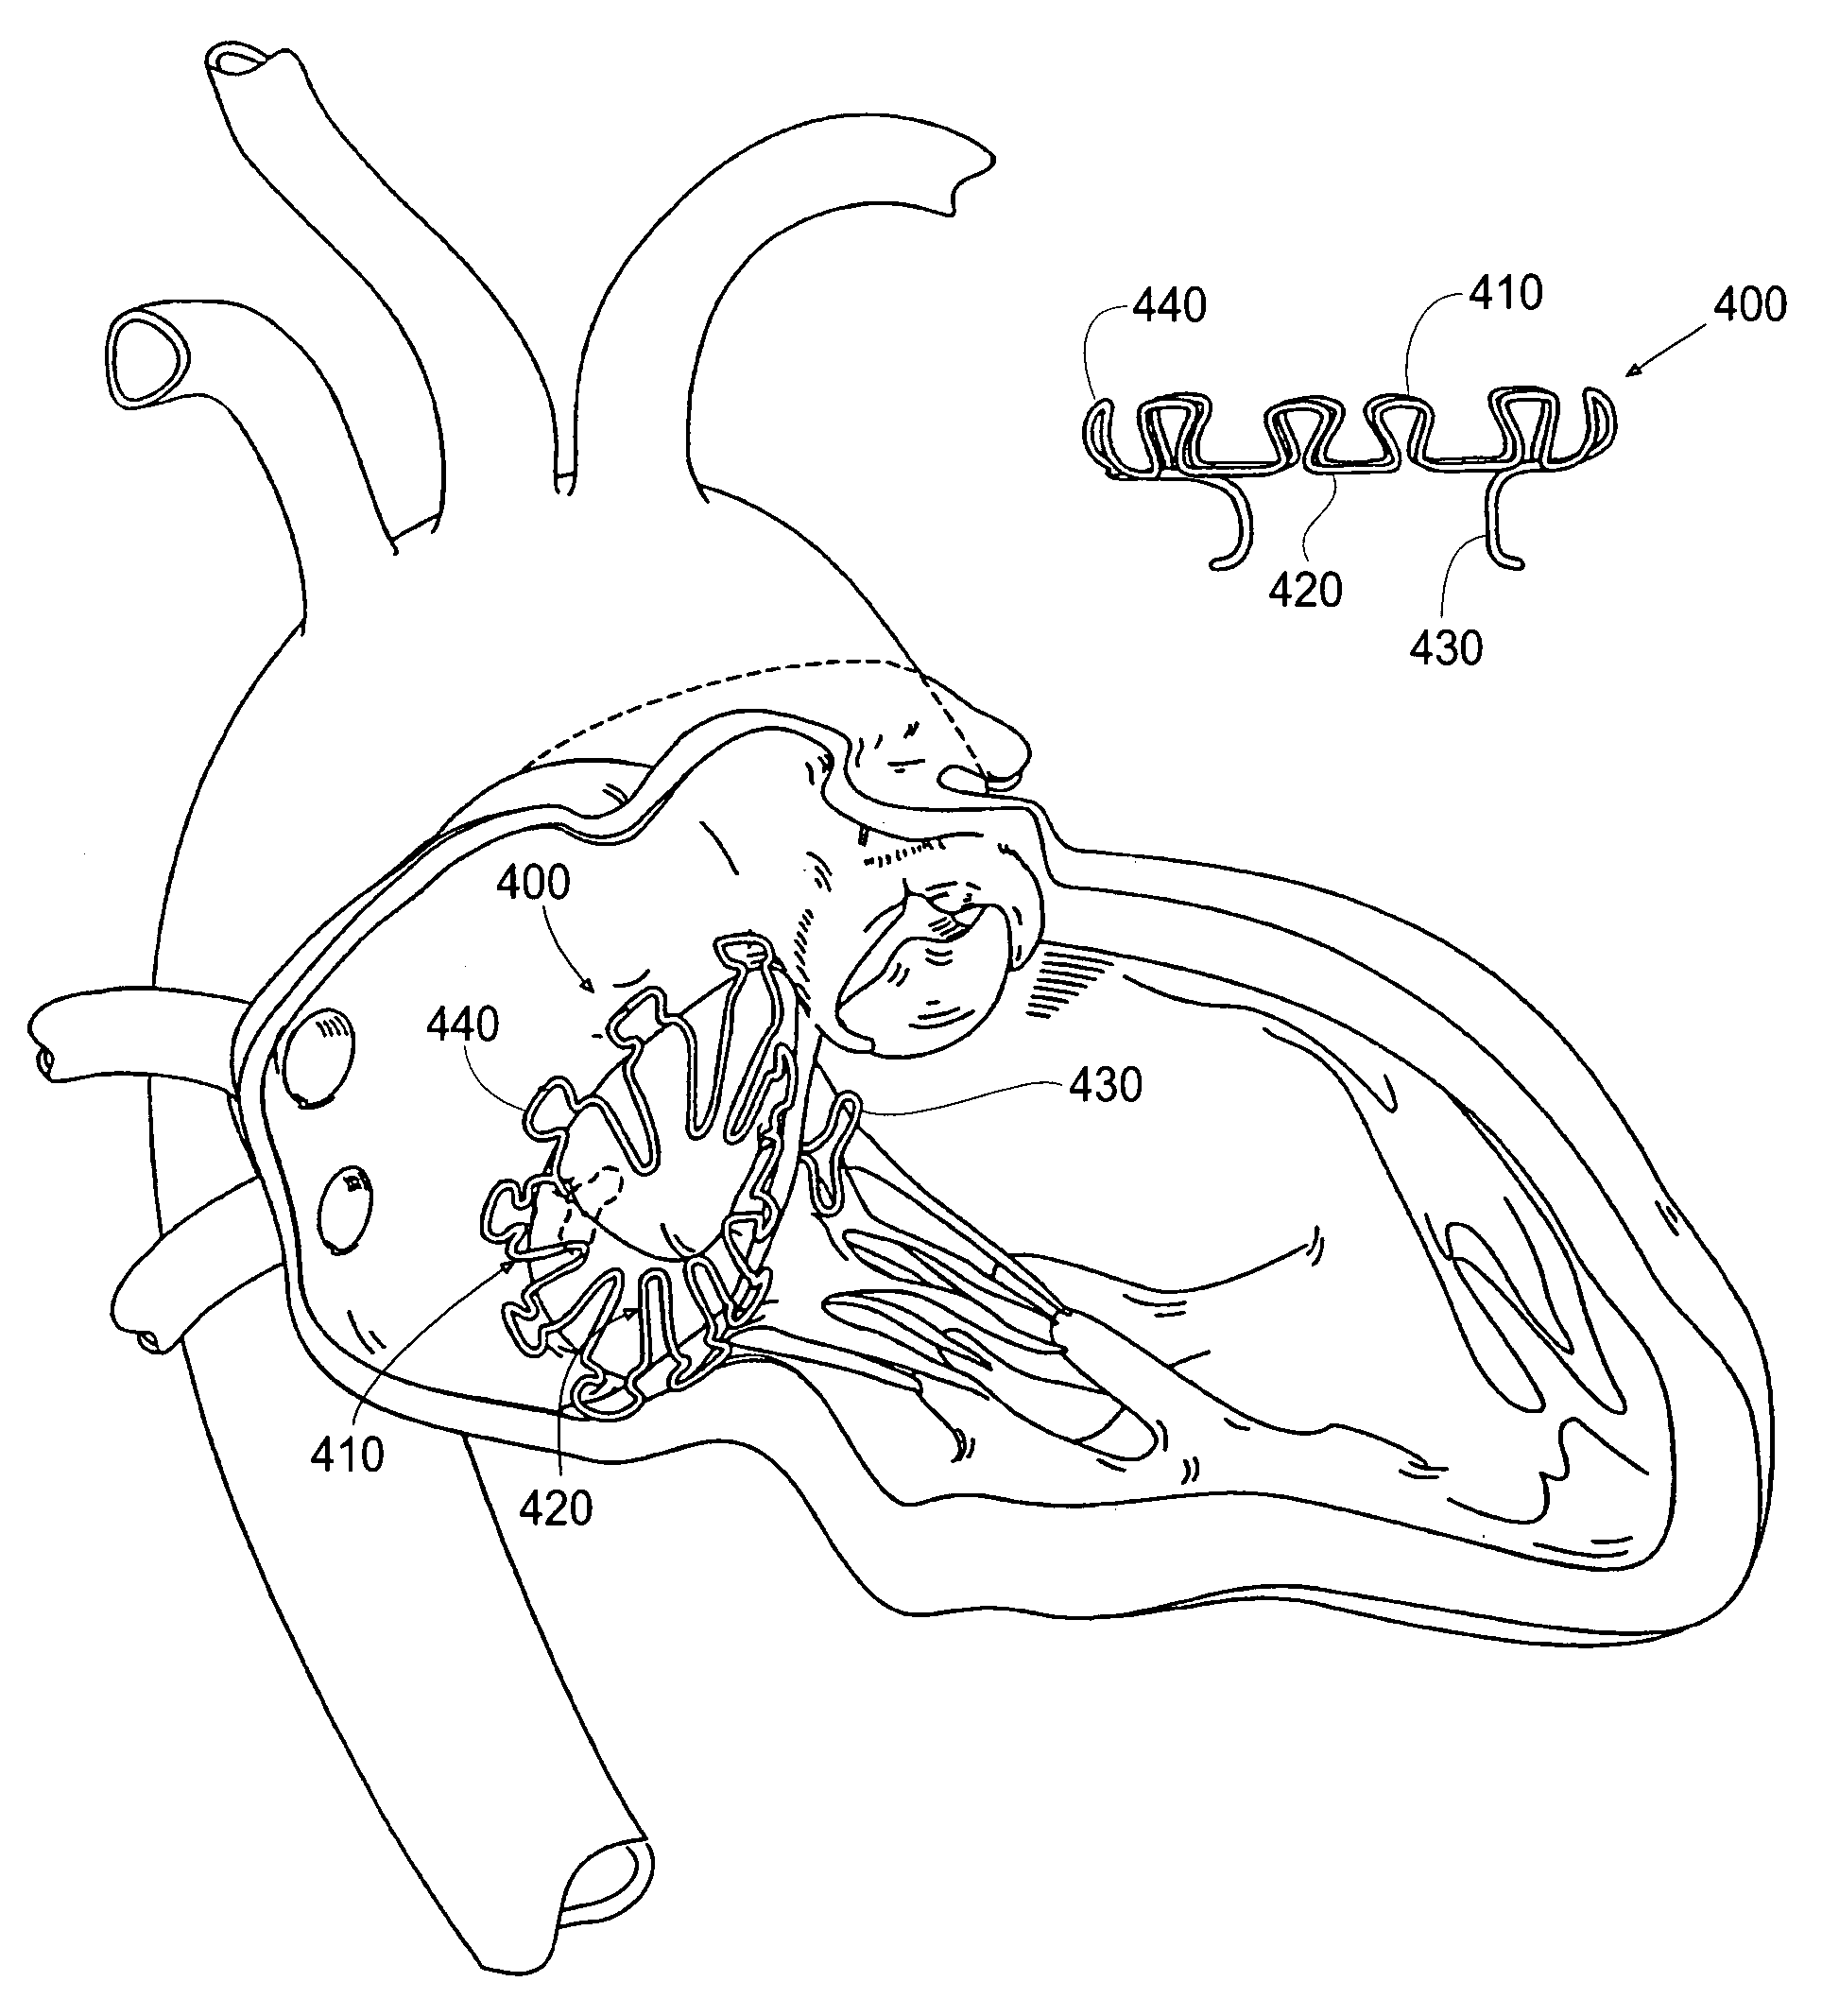 Devices, systems, and methods for retaining a native heart valve leaflet